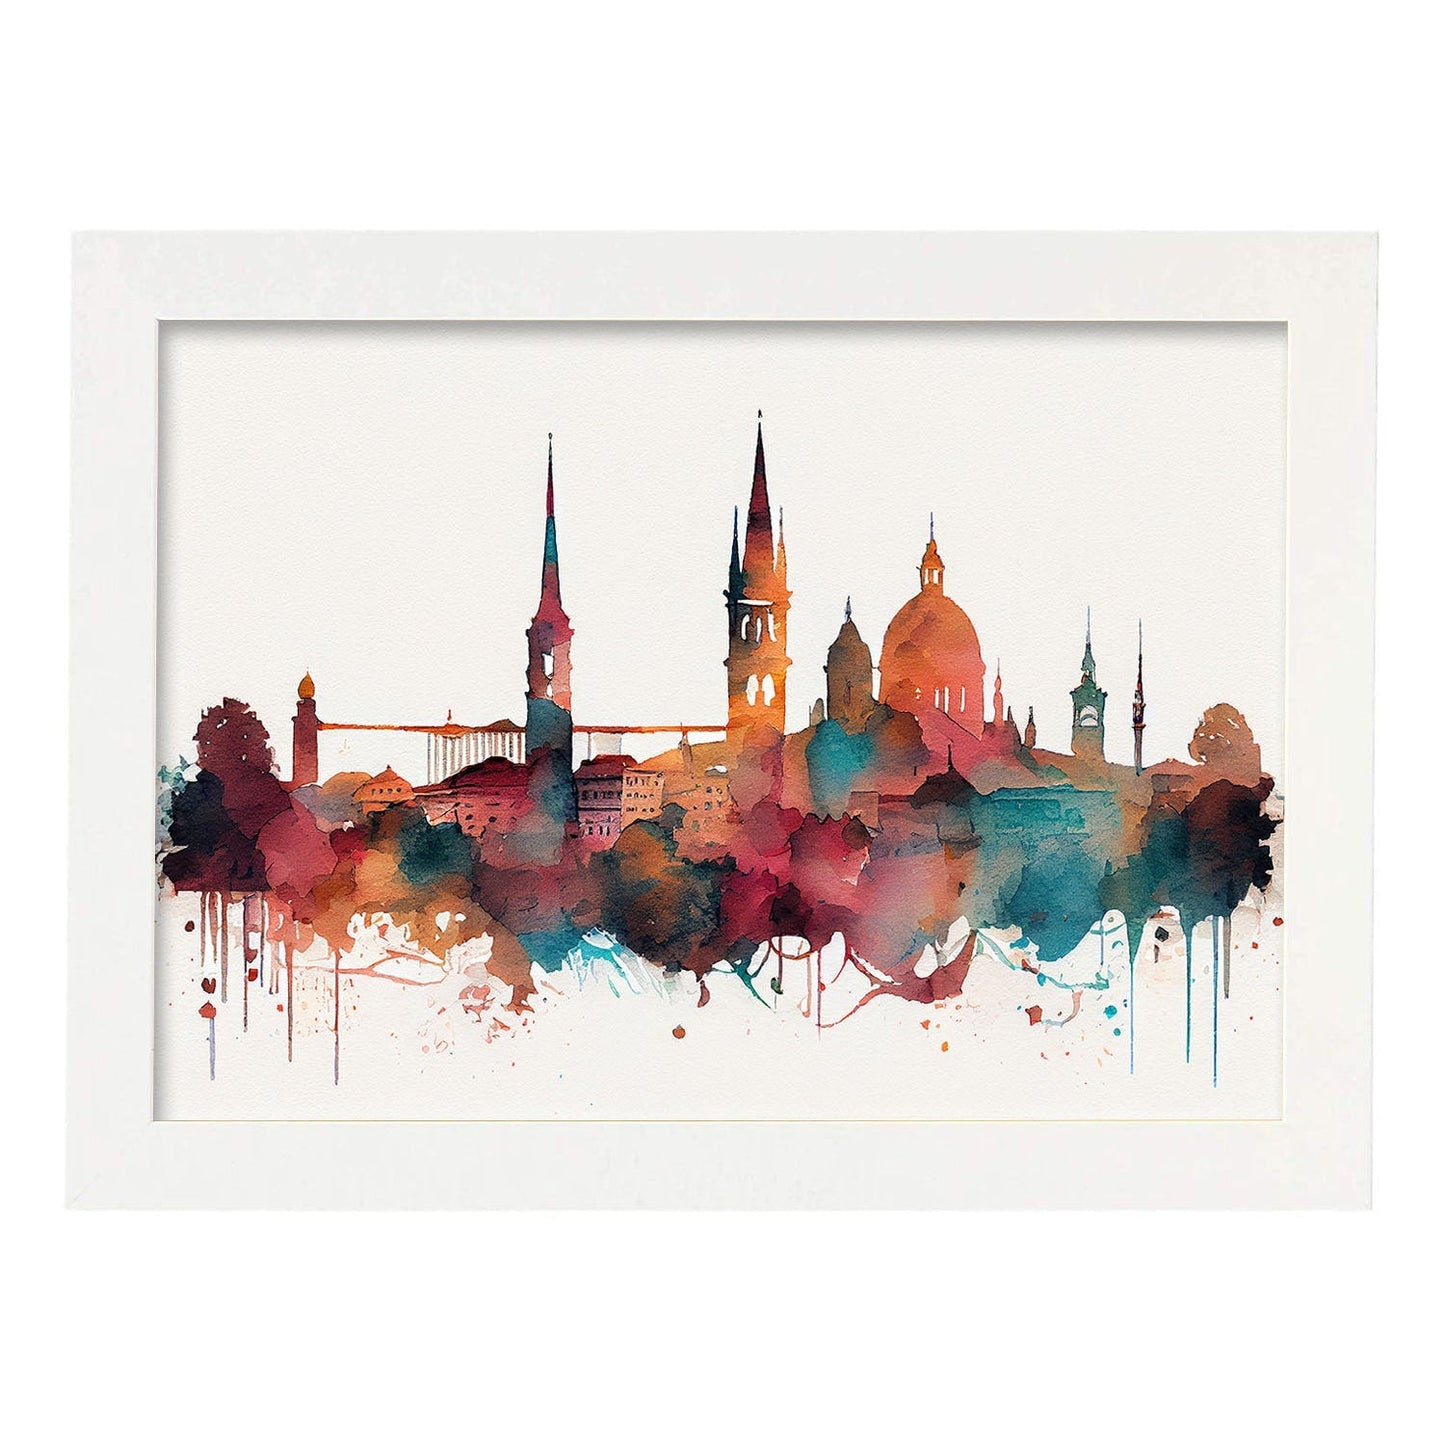 Nacnic watercolor of a skyline of the city of Zurich. Aesthetic Wall Art Prints for Bedroom or Living Room Design.-Artwork-Nacnic-A4-Marco Blanco-Nacnic Estudio SL